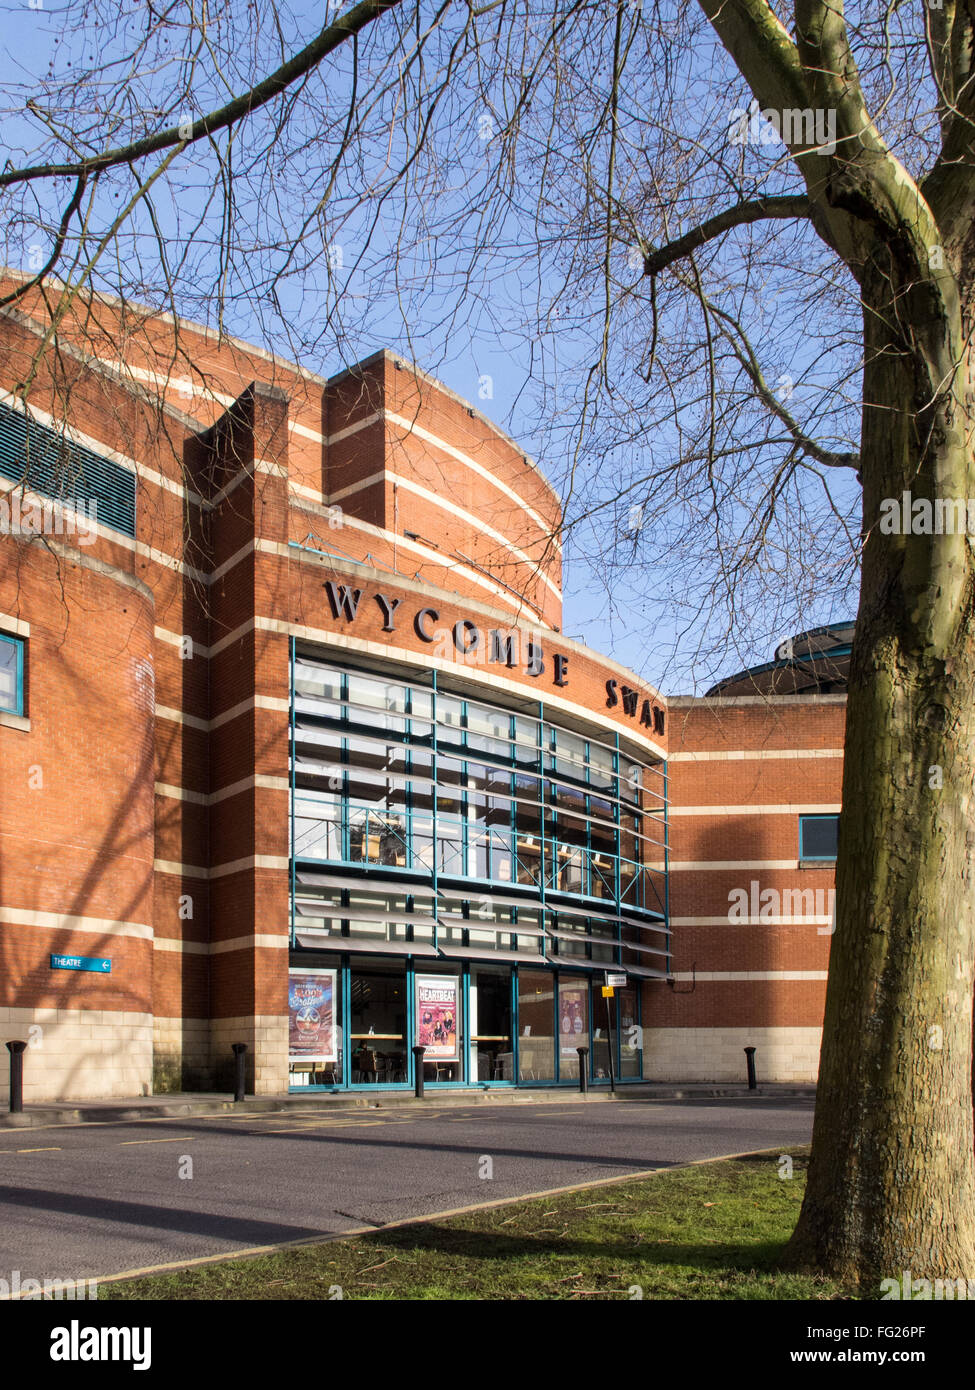 Le Wycombe Swan Theatre, High Wycombe, Buckinghamshire, Royaume-Uni. Banque D'Images